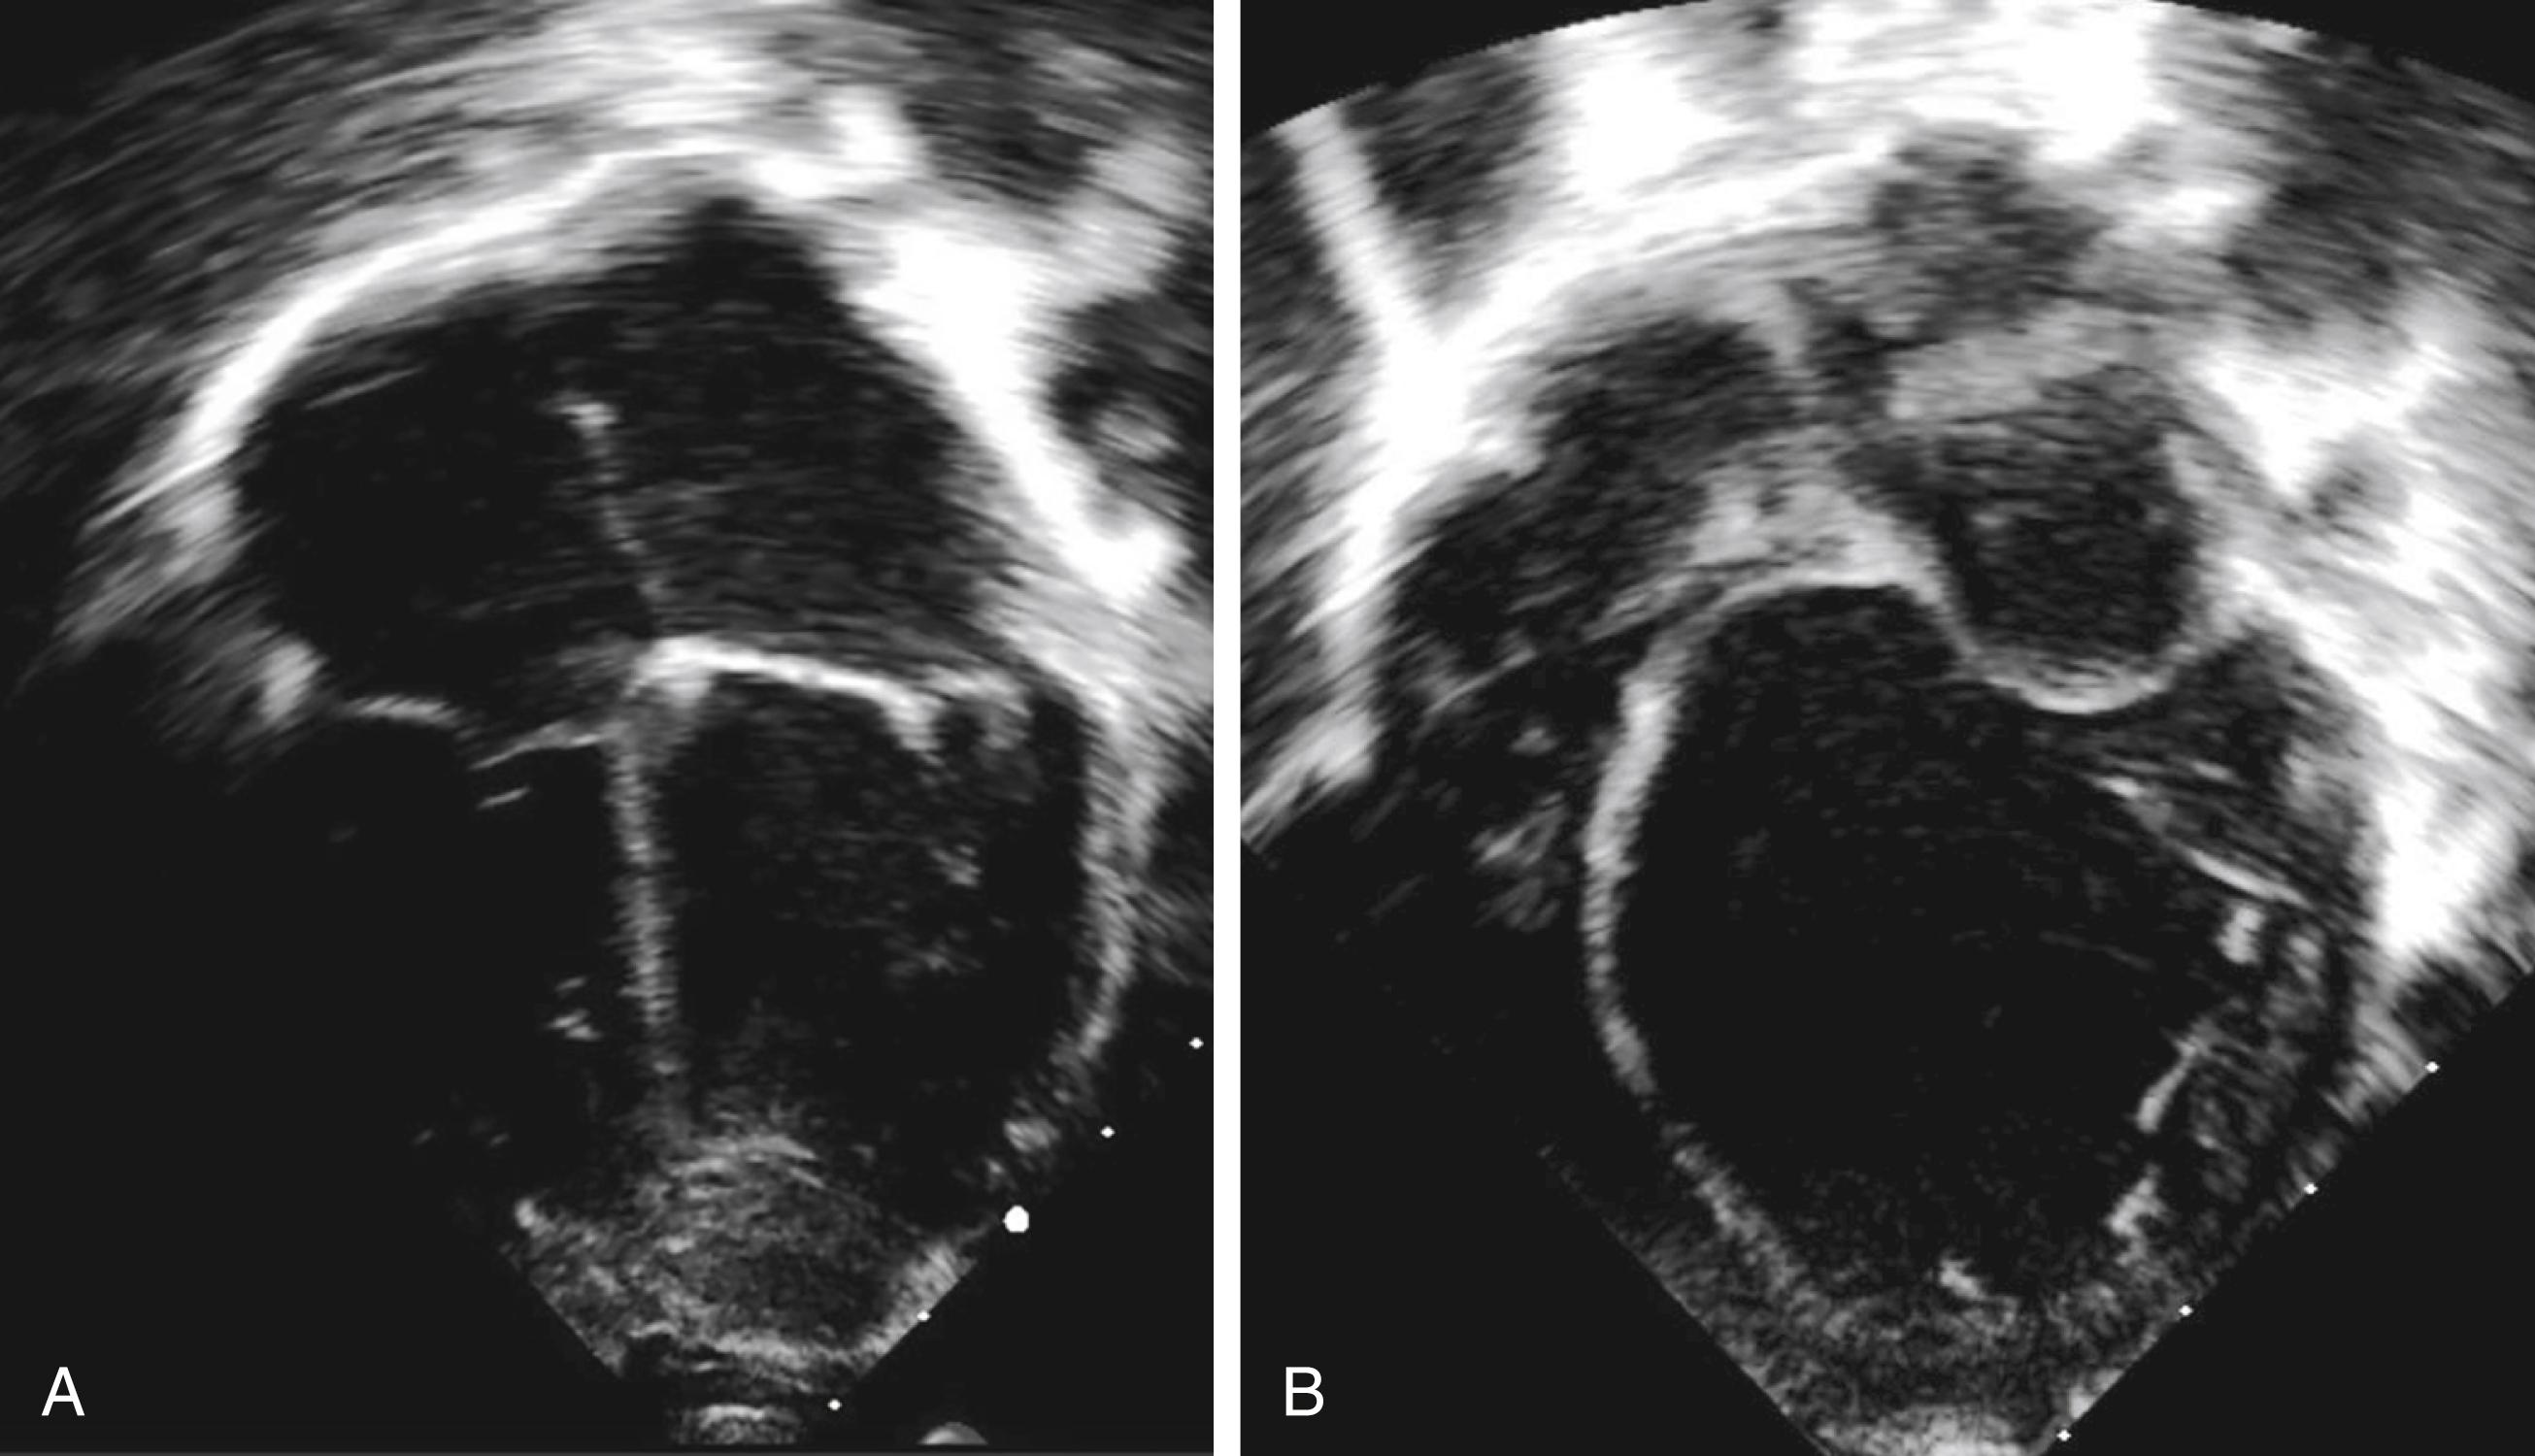 Fig. 153.3, Echocardiographic features of dilated cardiomyopathy. From a classic apical four-chamber view, 2-D echocardiography shows on the left (A), a normal triangular-shaped left ventricular chamber. On the right (B), echocardiography displays an enlarged and globular-shaped left ventricle with relative wall thinning to the chamber diameter, making the diagnosis of dilated cardiomyopathy.